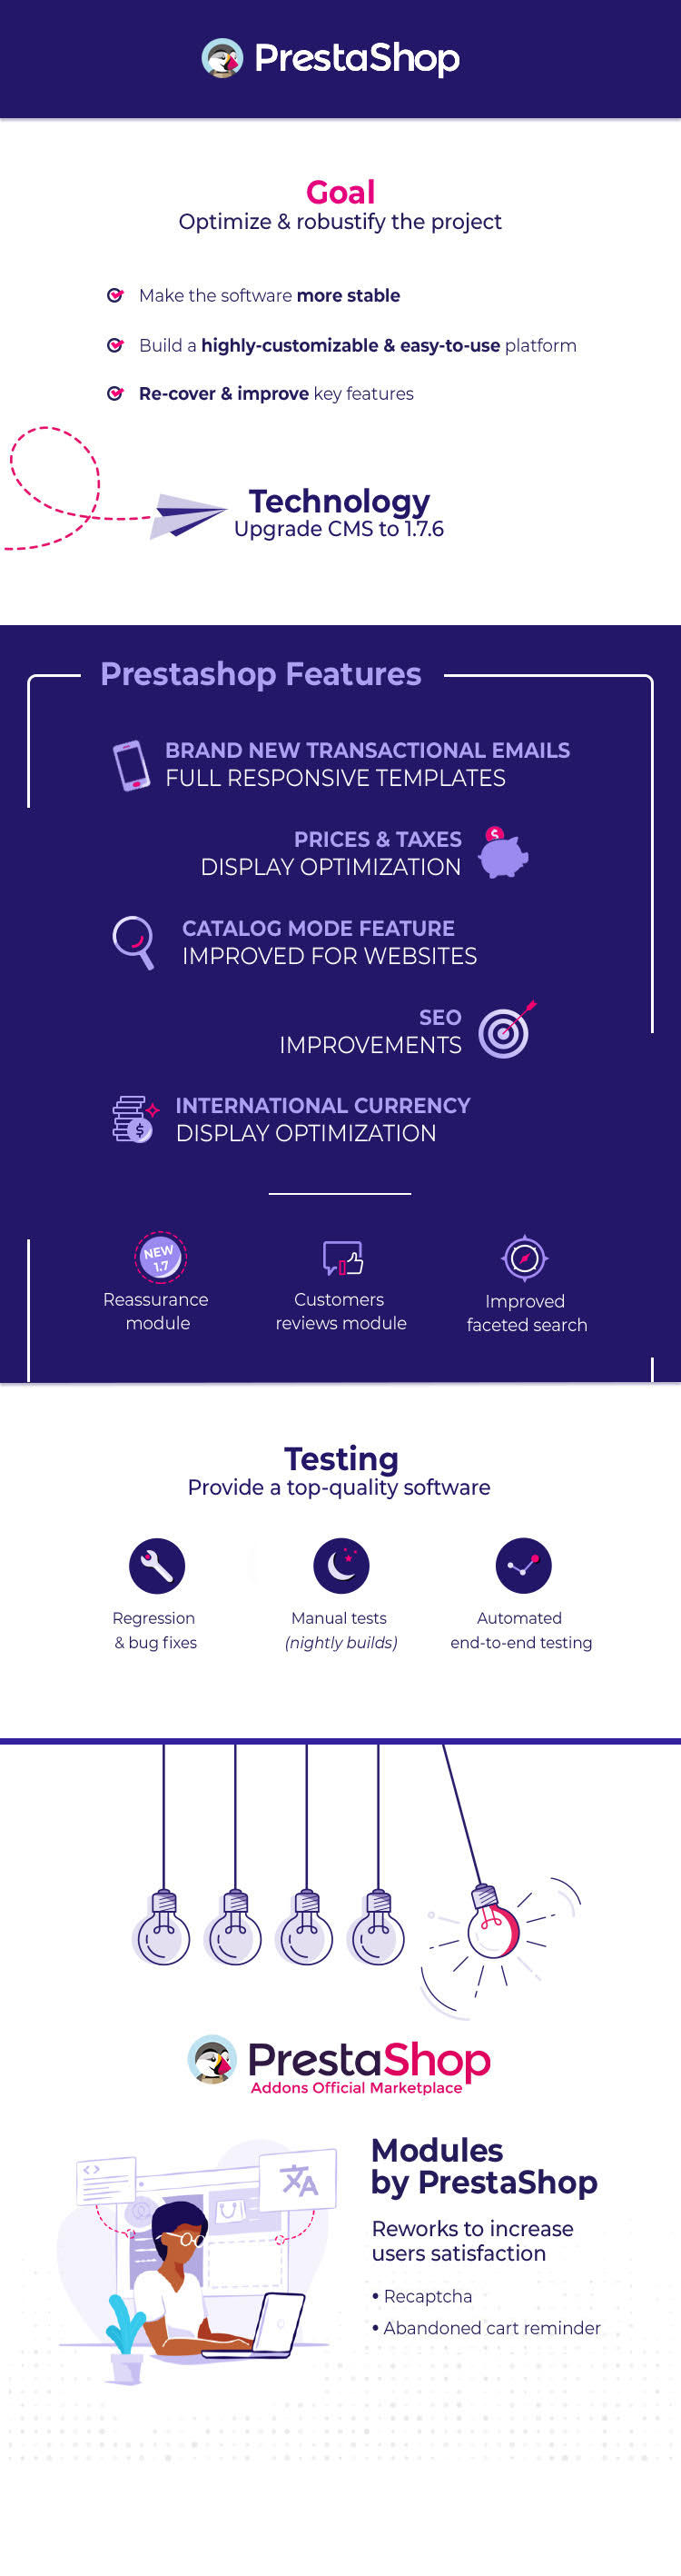 PrestaShop’s news and stakes in an infographic